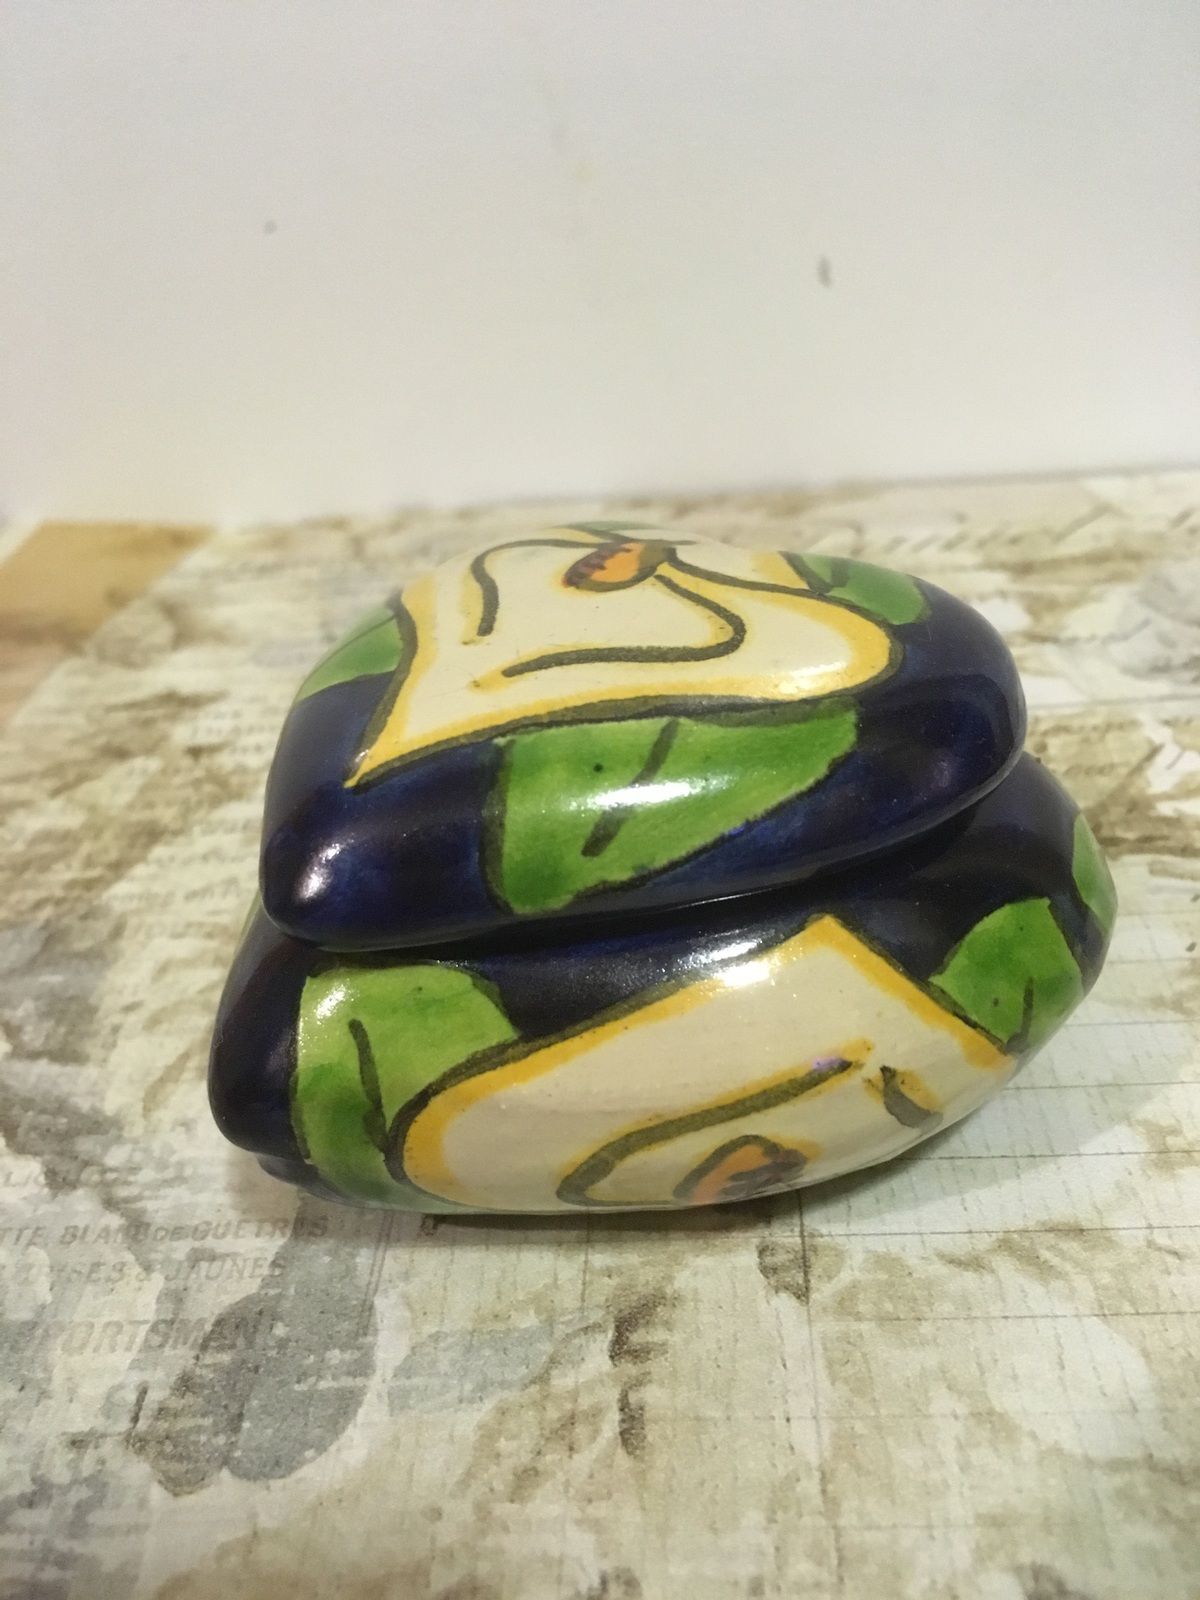 Vintage Heart Shaped Lily Trinket Box Signed Folk Art Mexican Pottery  - $8.00